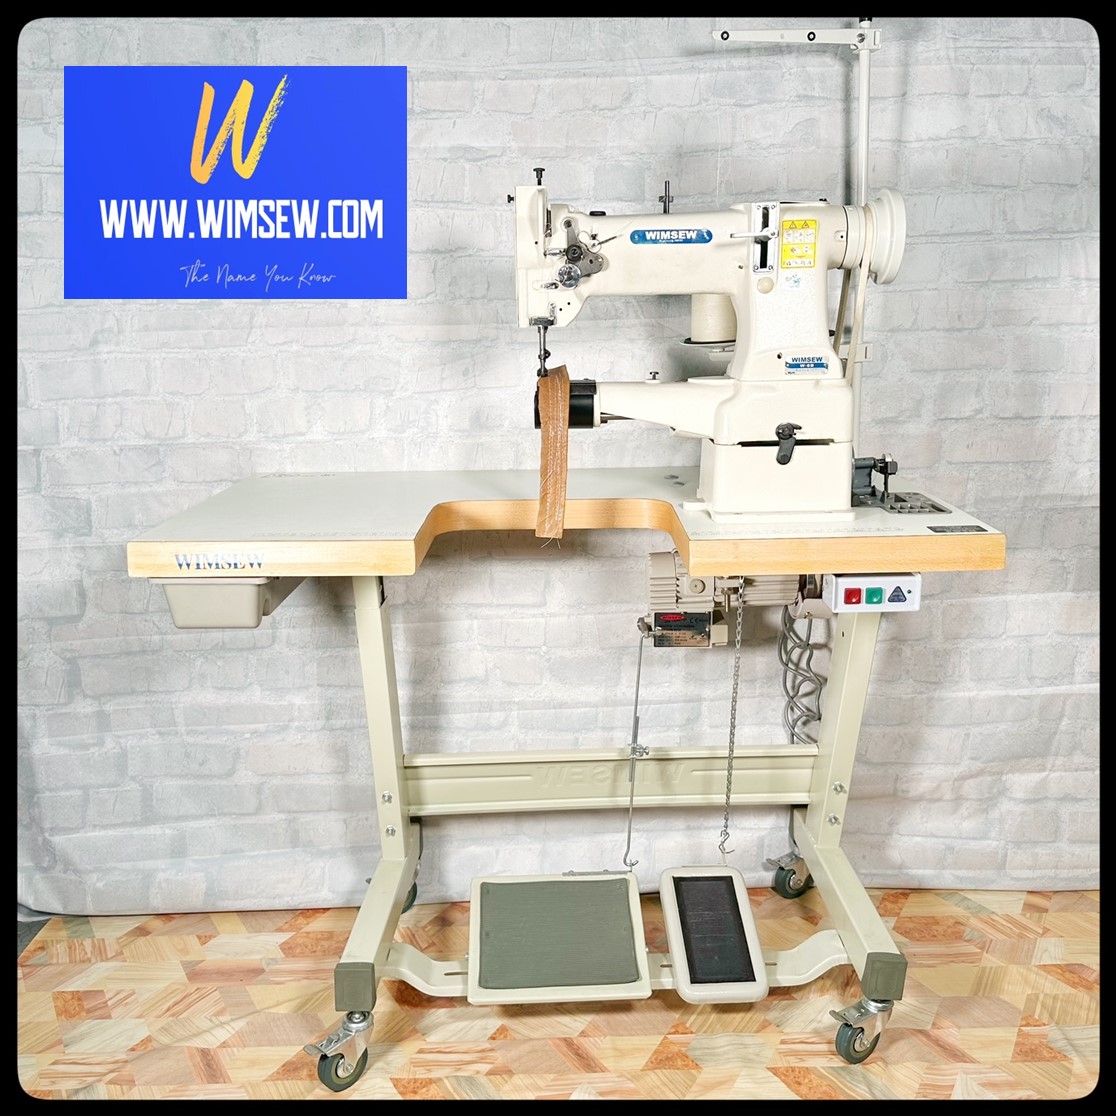 WIMSEW W-8B - Heavy Duty Cylinder Arm Machine - Call now for more information. 020 8767 0036 - choose option 3